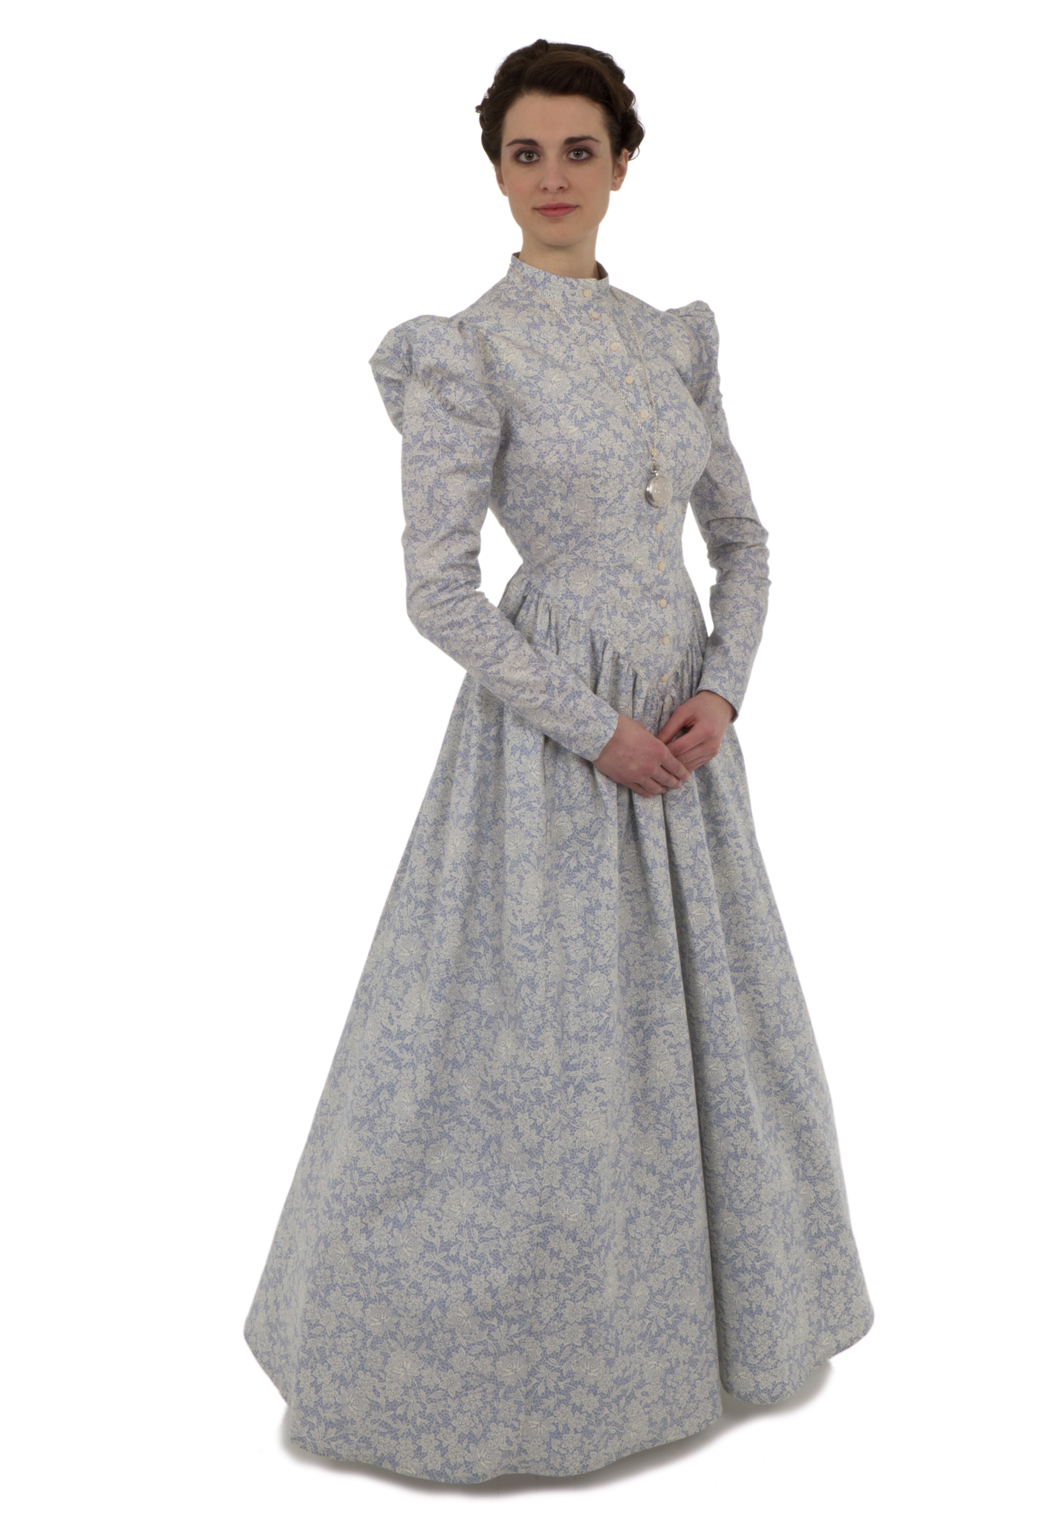 Old West From Recollections and The Most Awesome and Attractive Old Fashioned Clothes For Women for Current Ideas